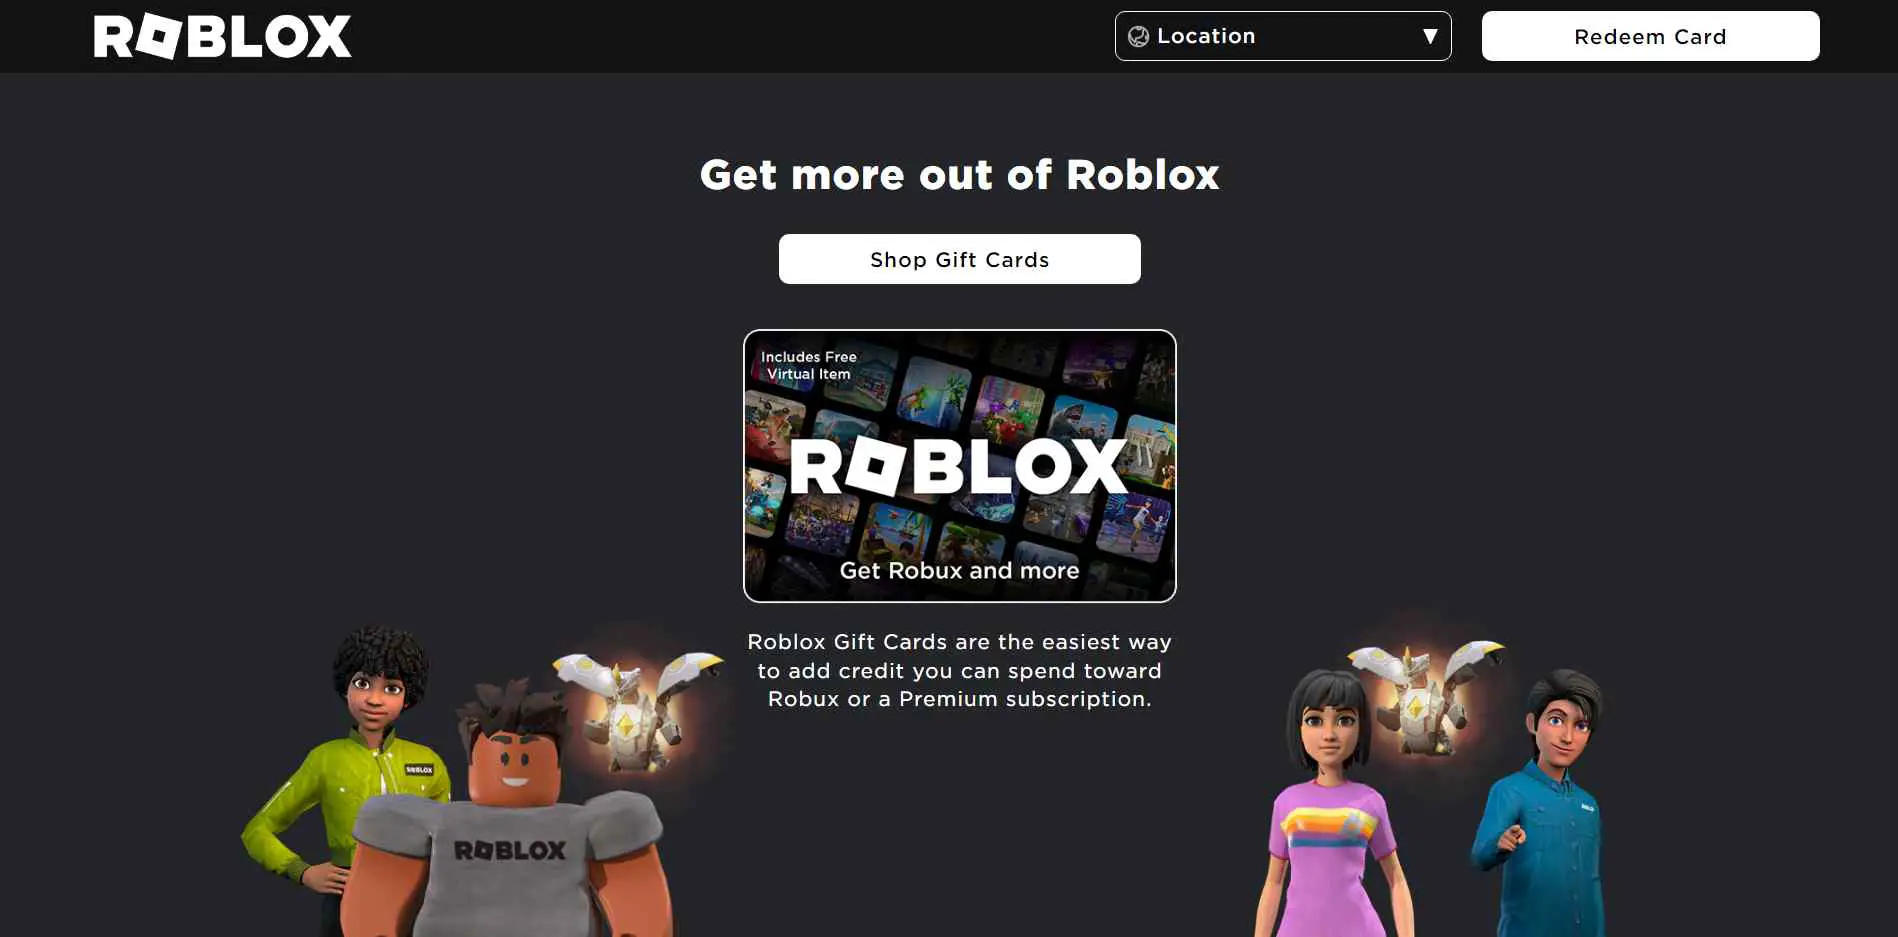 Another gift card that is highly prized by online PC gamers is the Roblox gift card.